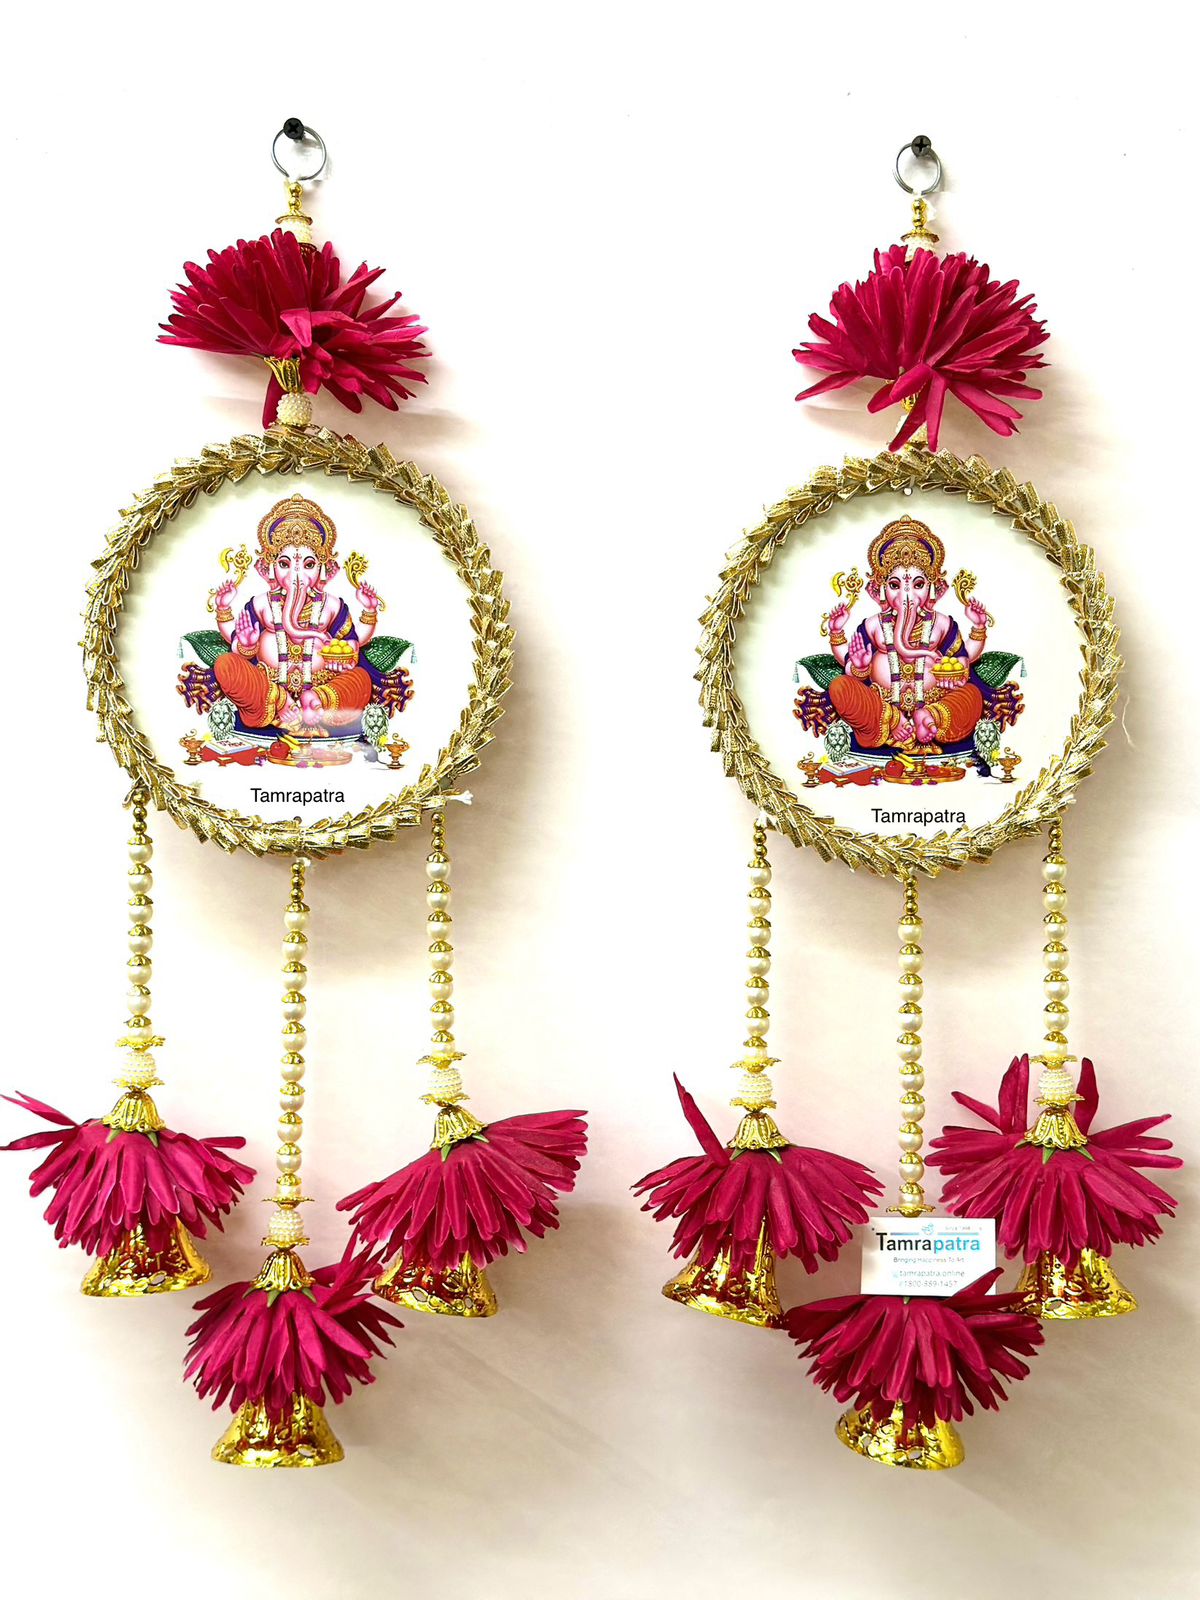 Ganesh Circle Hangings Floral Exclusive Gifts Décor With Bells From Tamrapatra